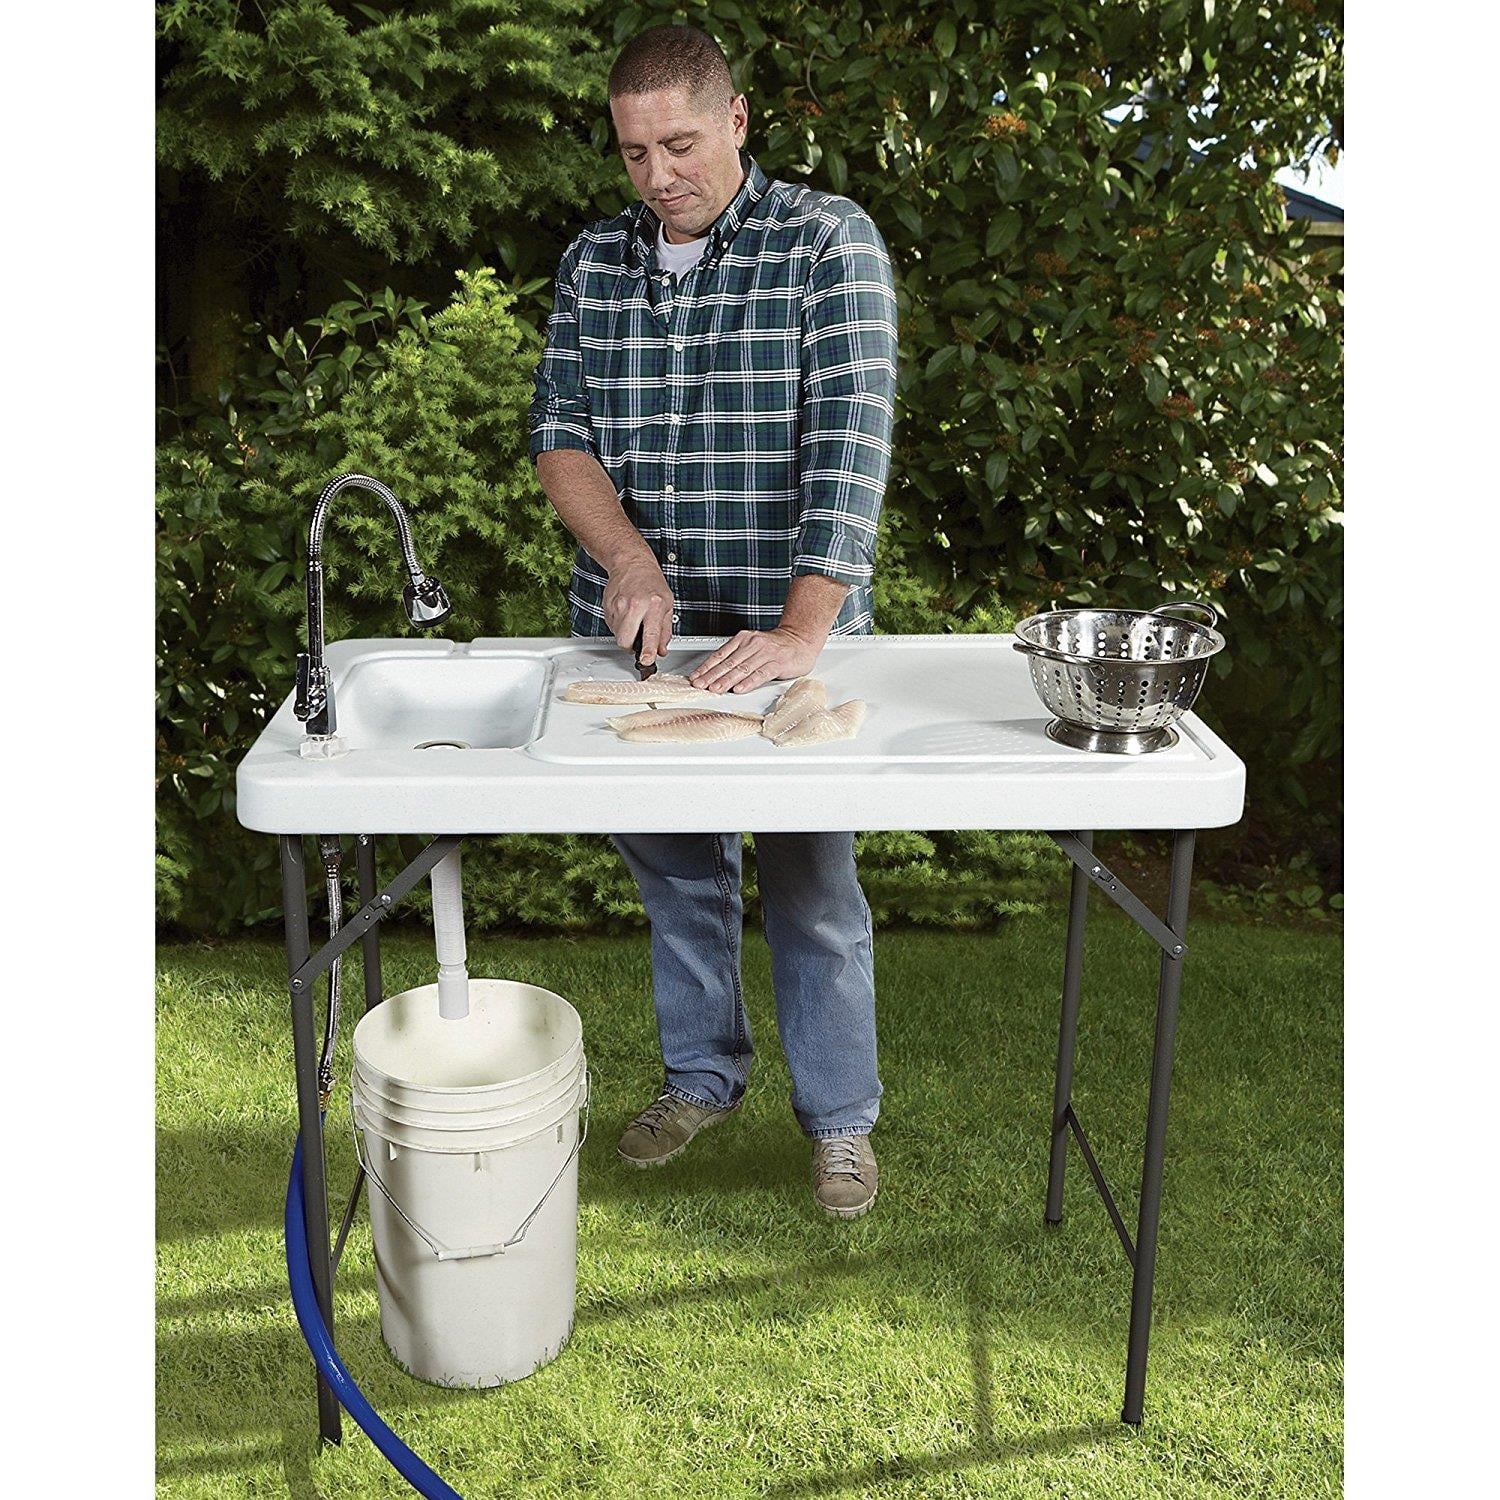 Portable Folding Fillet Table With Sink Faucet Hunt Fish Cutting Cleaning Campin 